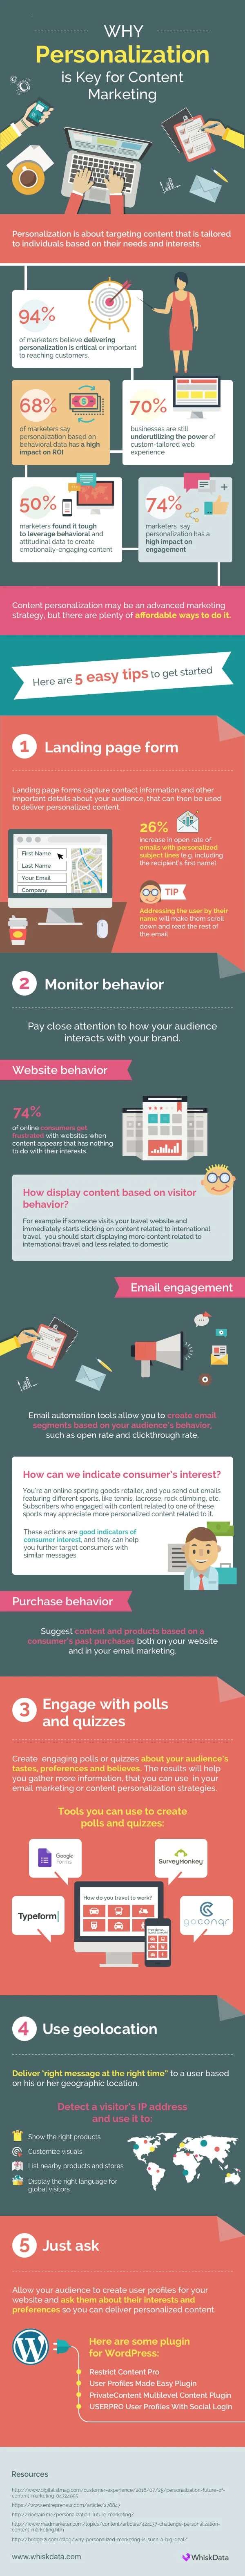 Why Personalization Is Key for Content Marketing [infographic]